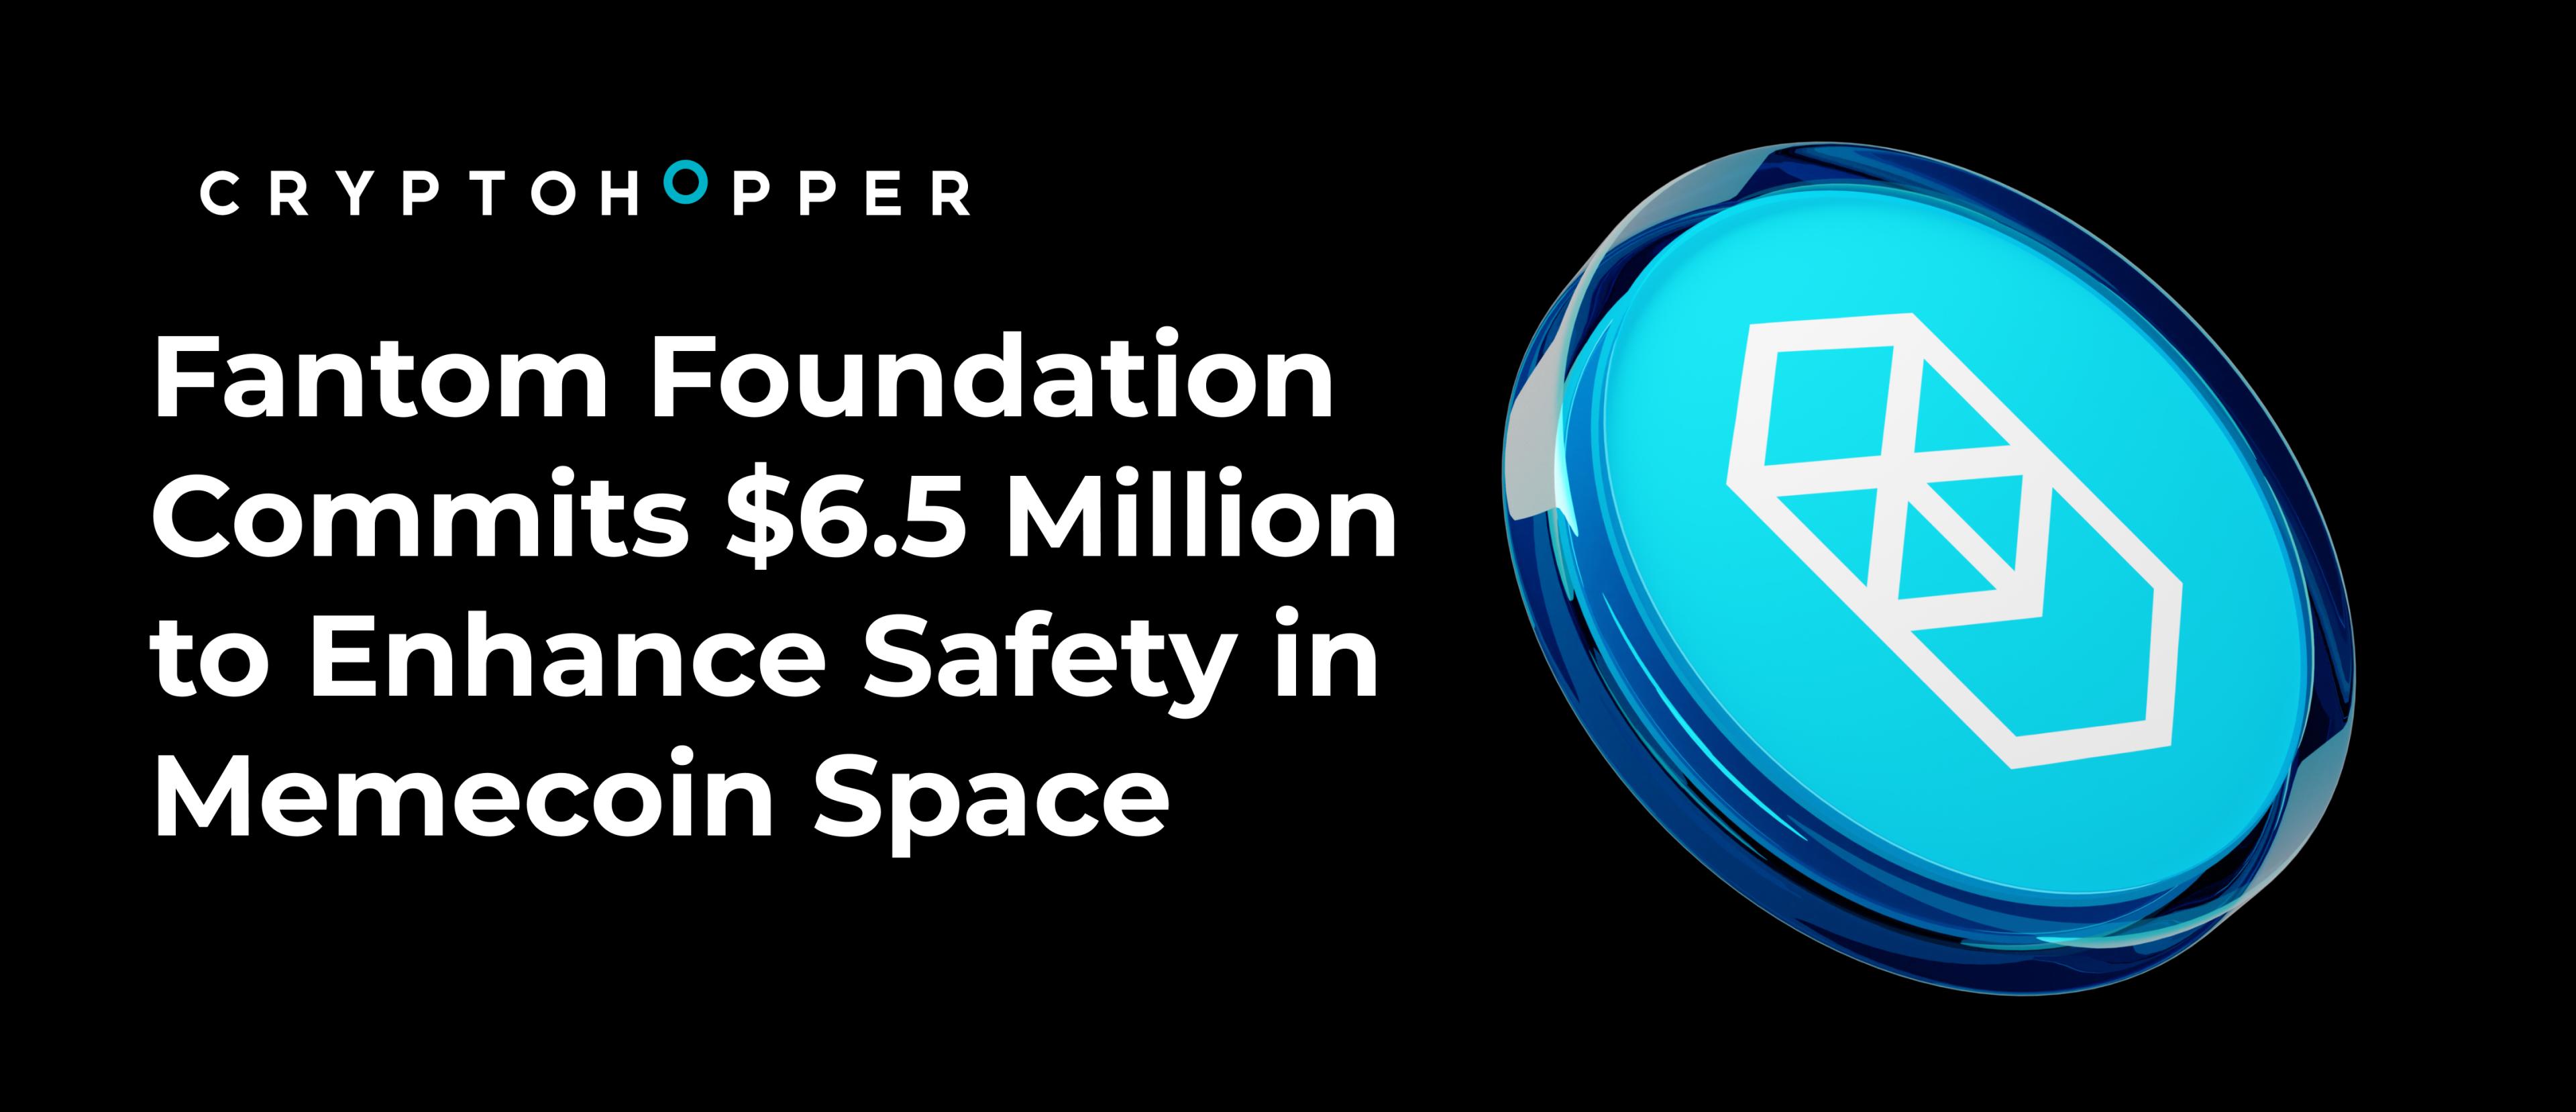 Fantom Foundation Commits $6.5 Million to Enhance Safety in Memecoin Space